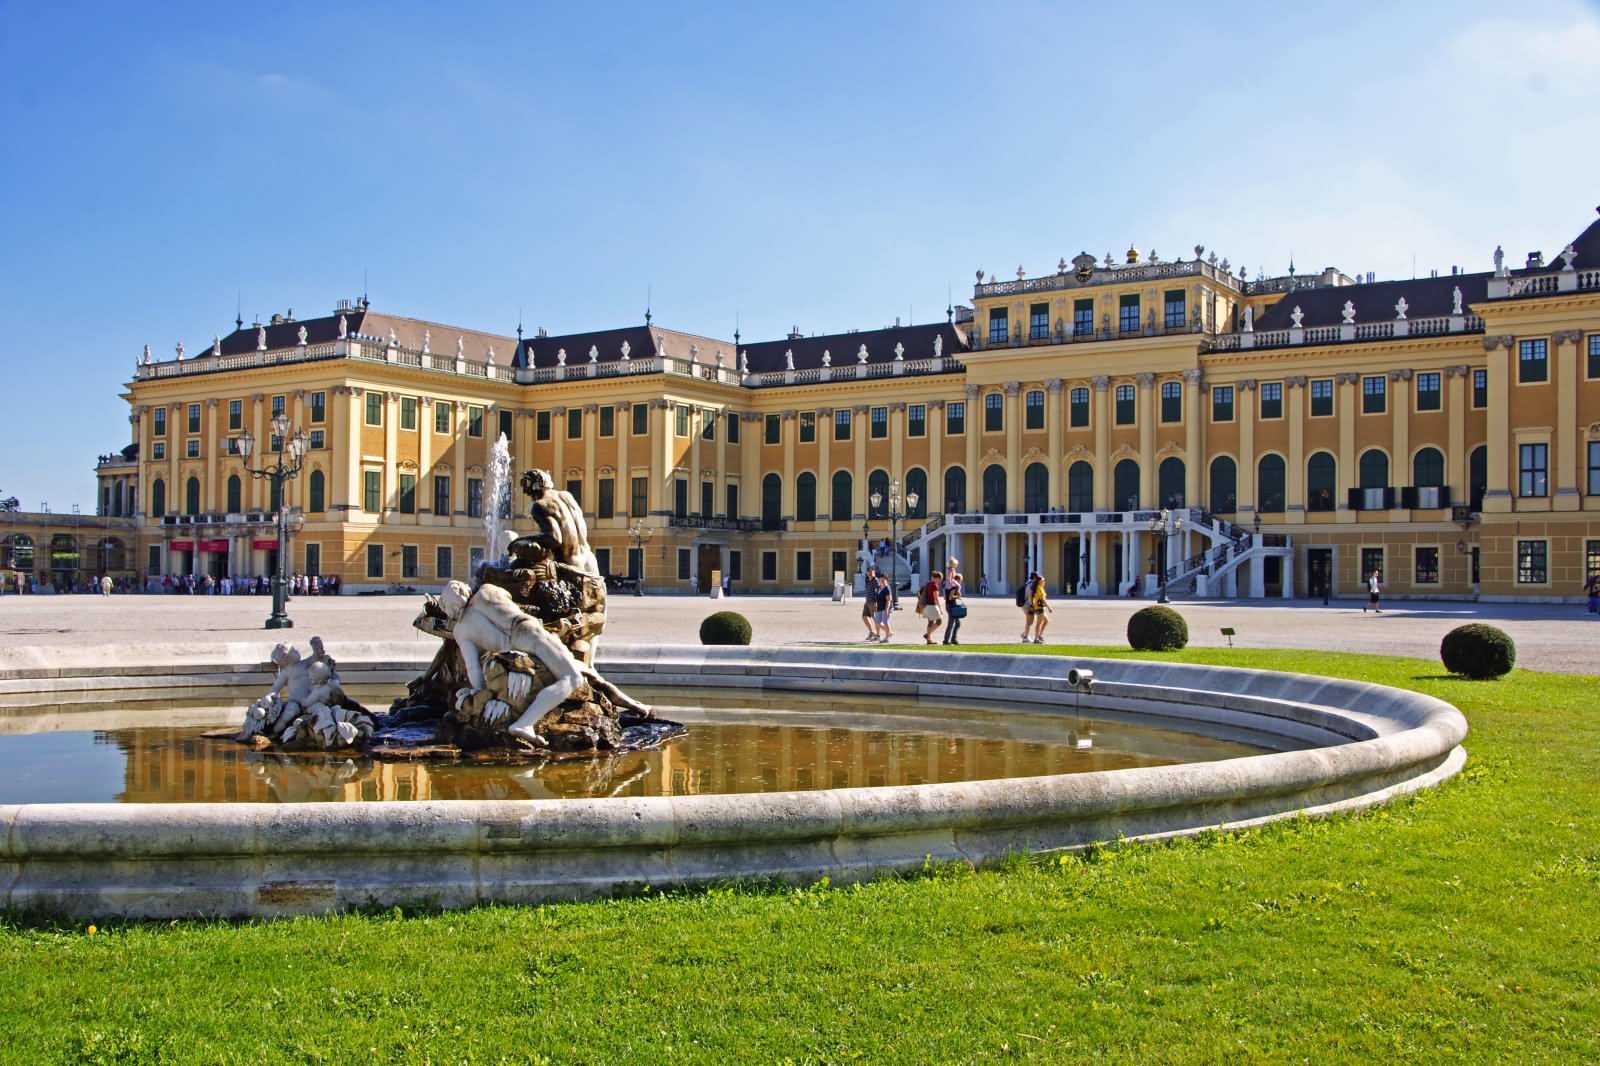 Beautiful Fountain In Front Of The Schonbrunn Palace In Vienna, Austria